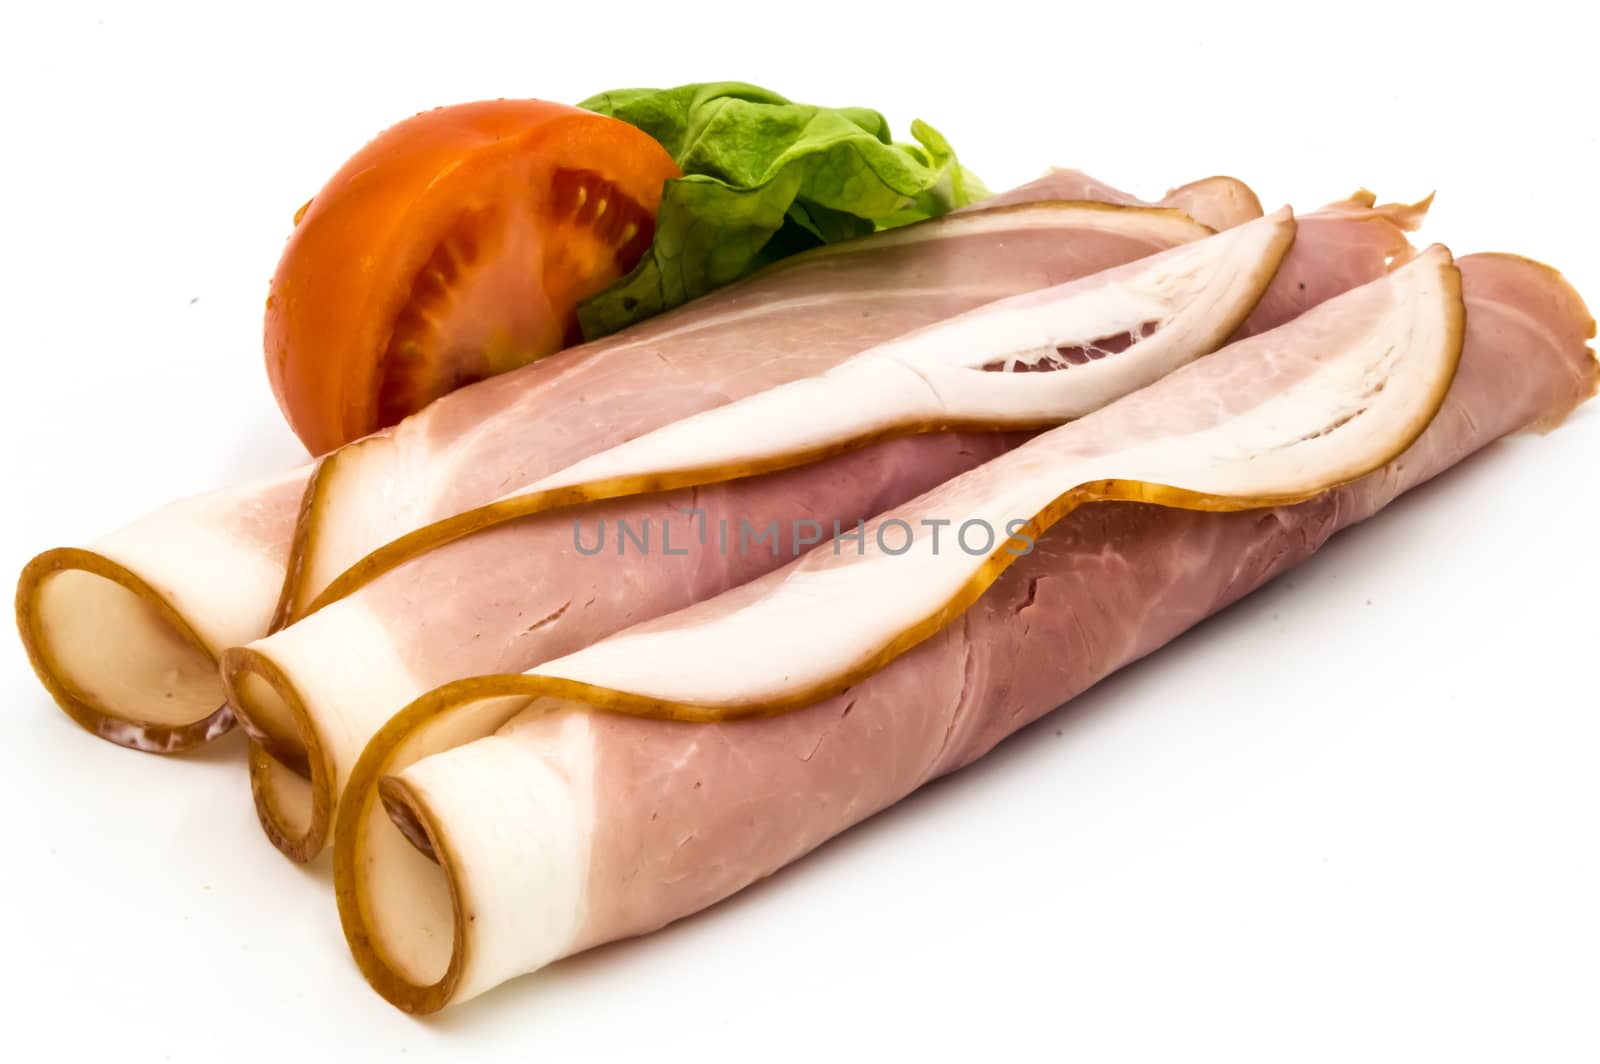 Slice of cooked ham on a white background with  by Philou1000